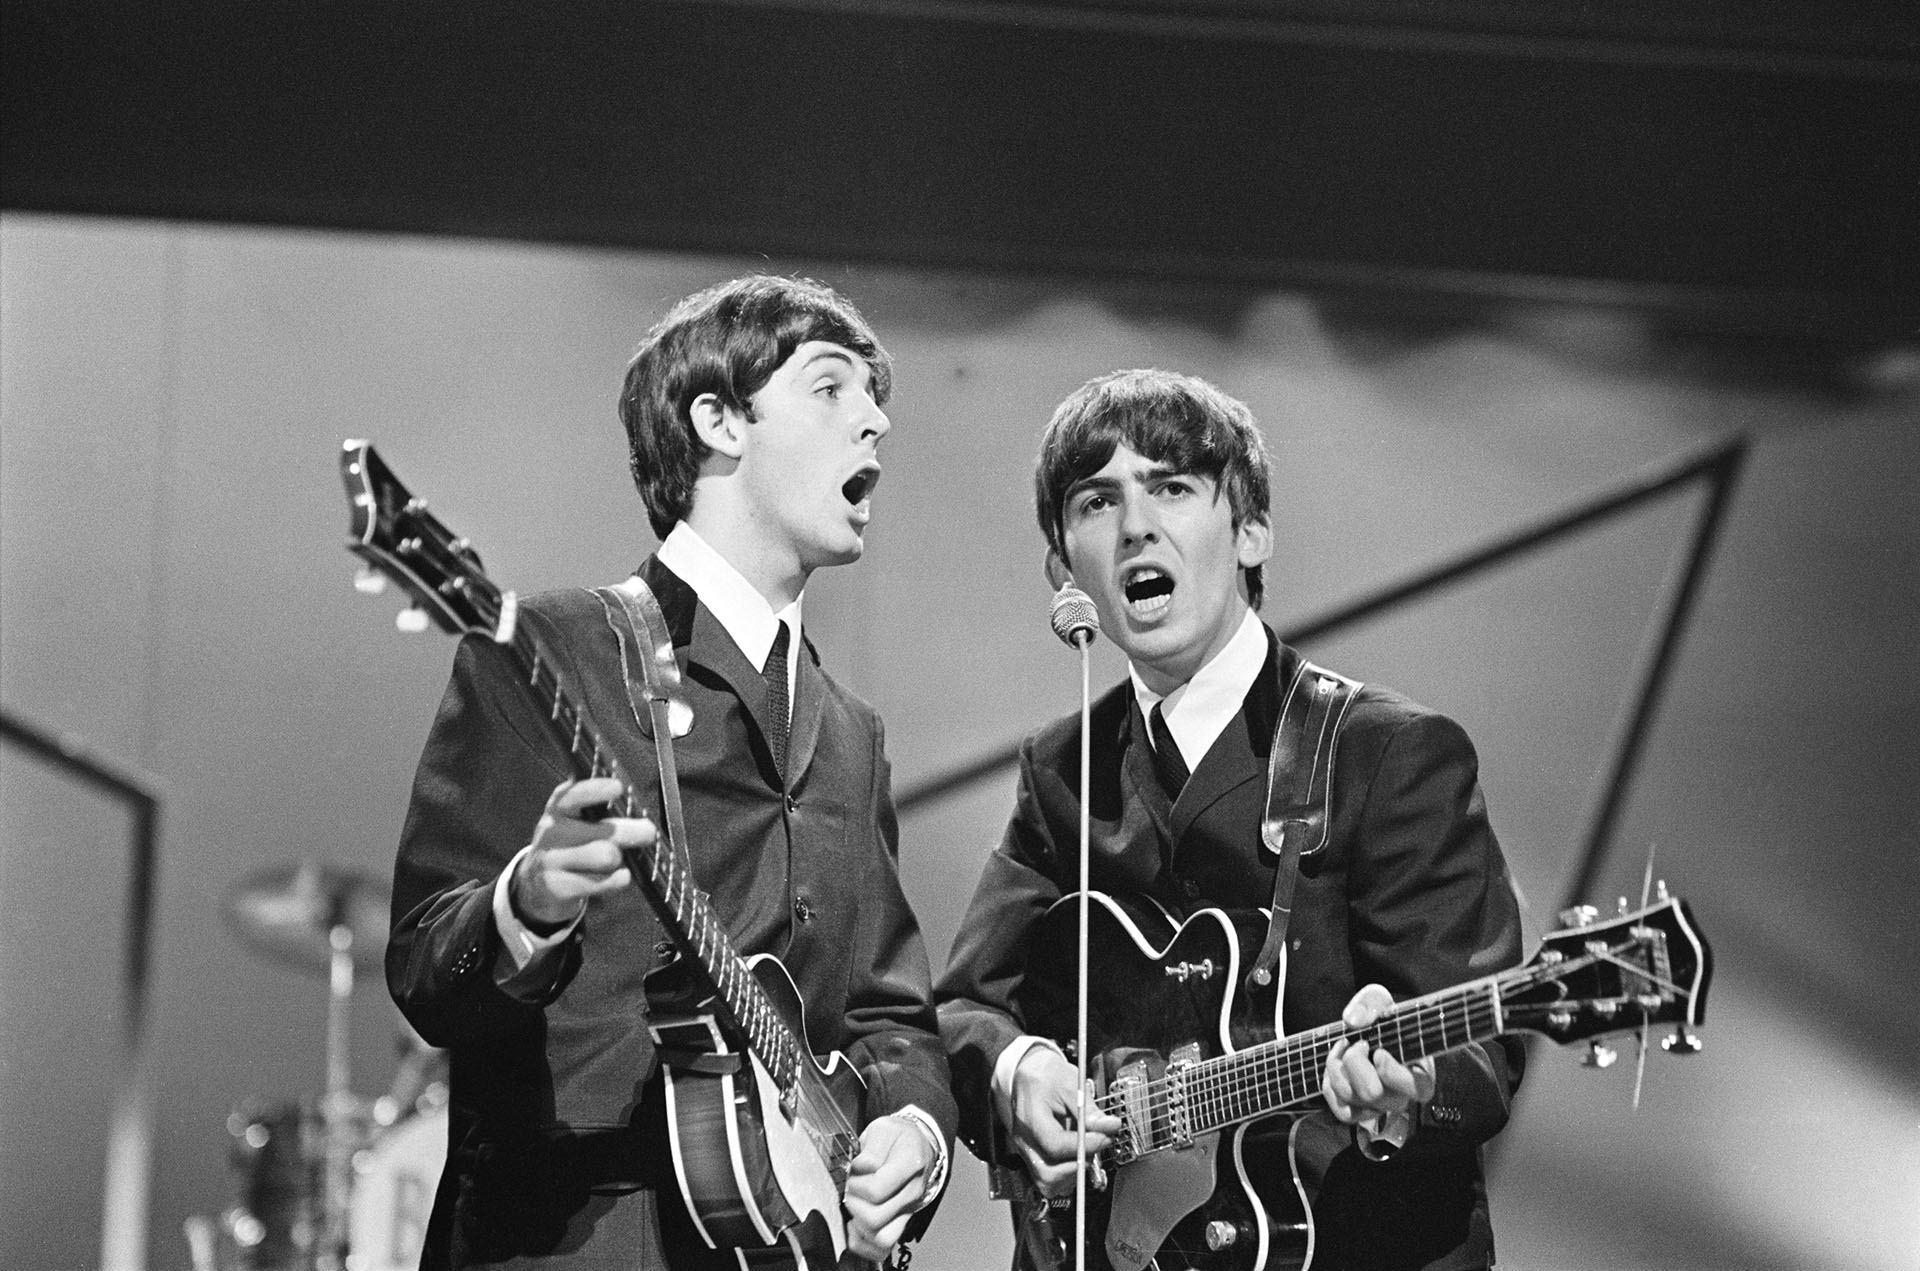 British musicians Paul McCartney and George Harrison (1943 - 2001) of the Beatles performing on stage  at the London Palladium, UK, 13th October 1963. (Photo by Edward Wing/Daily Express/Hulton Archive/Getty Images)